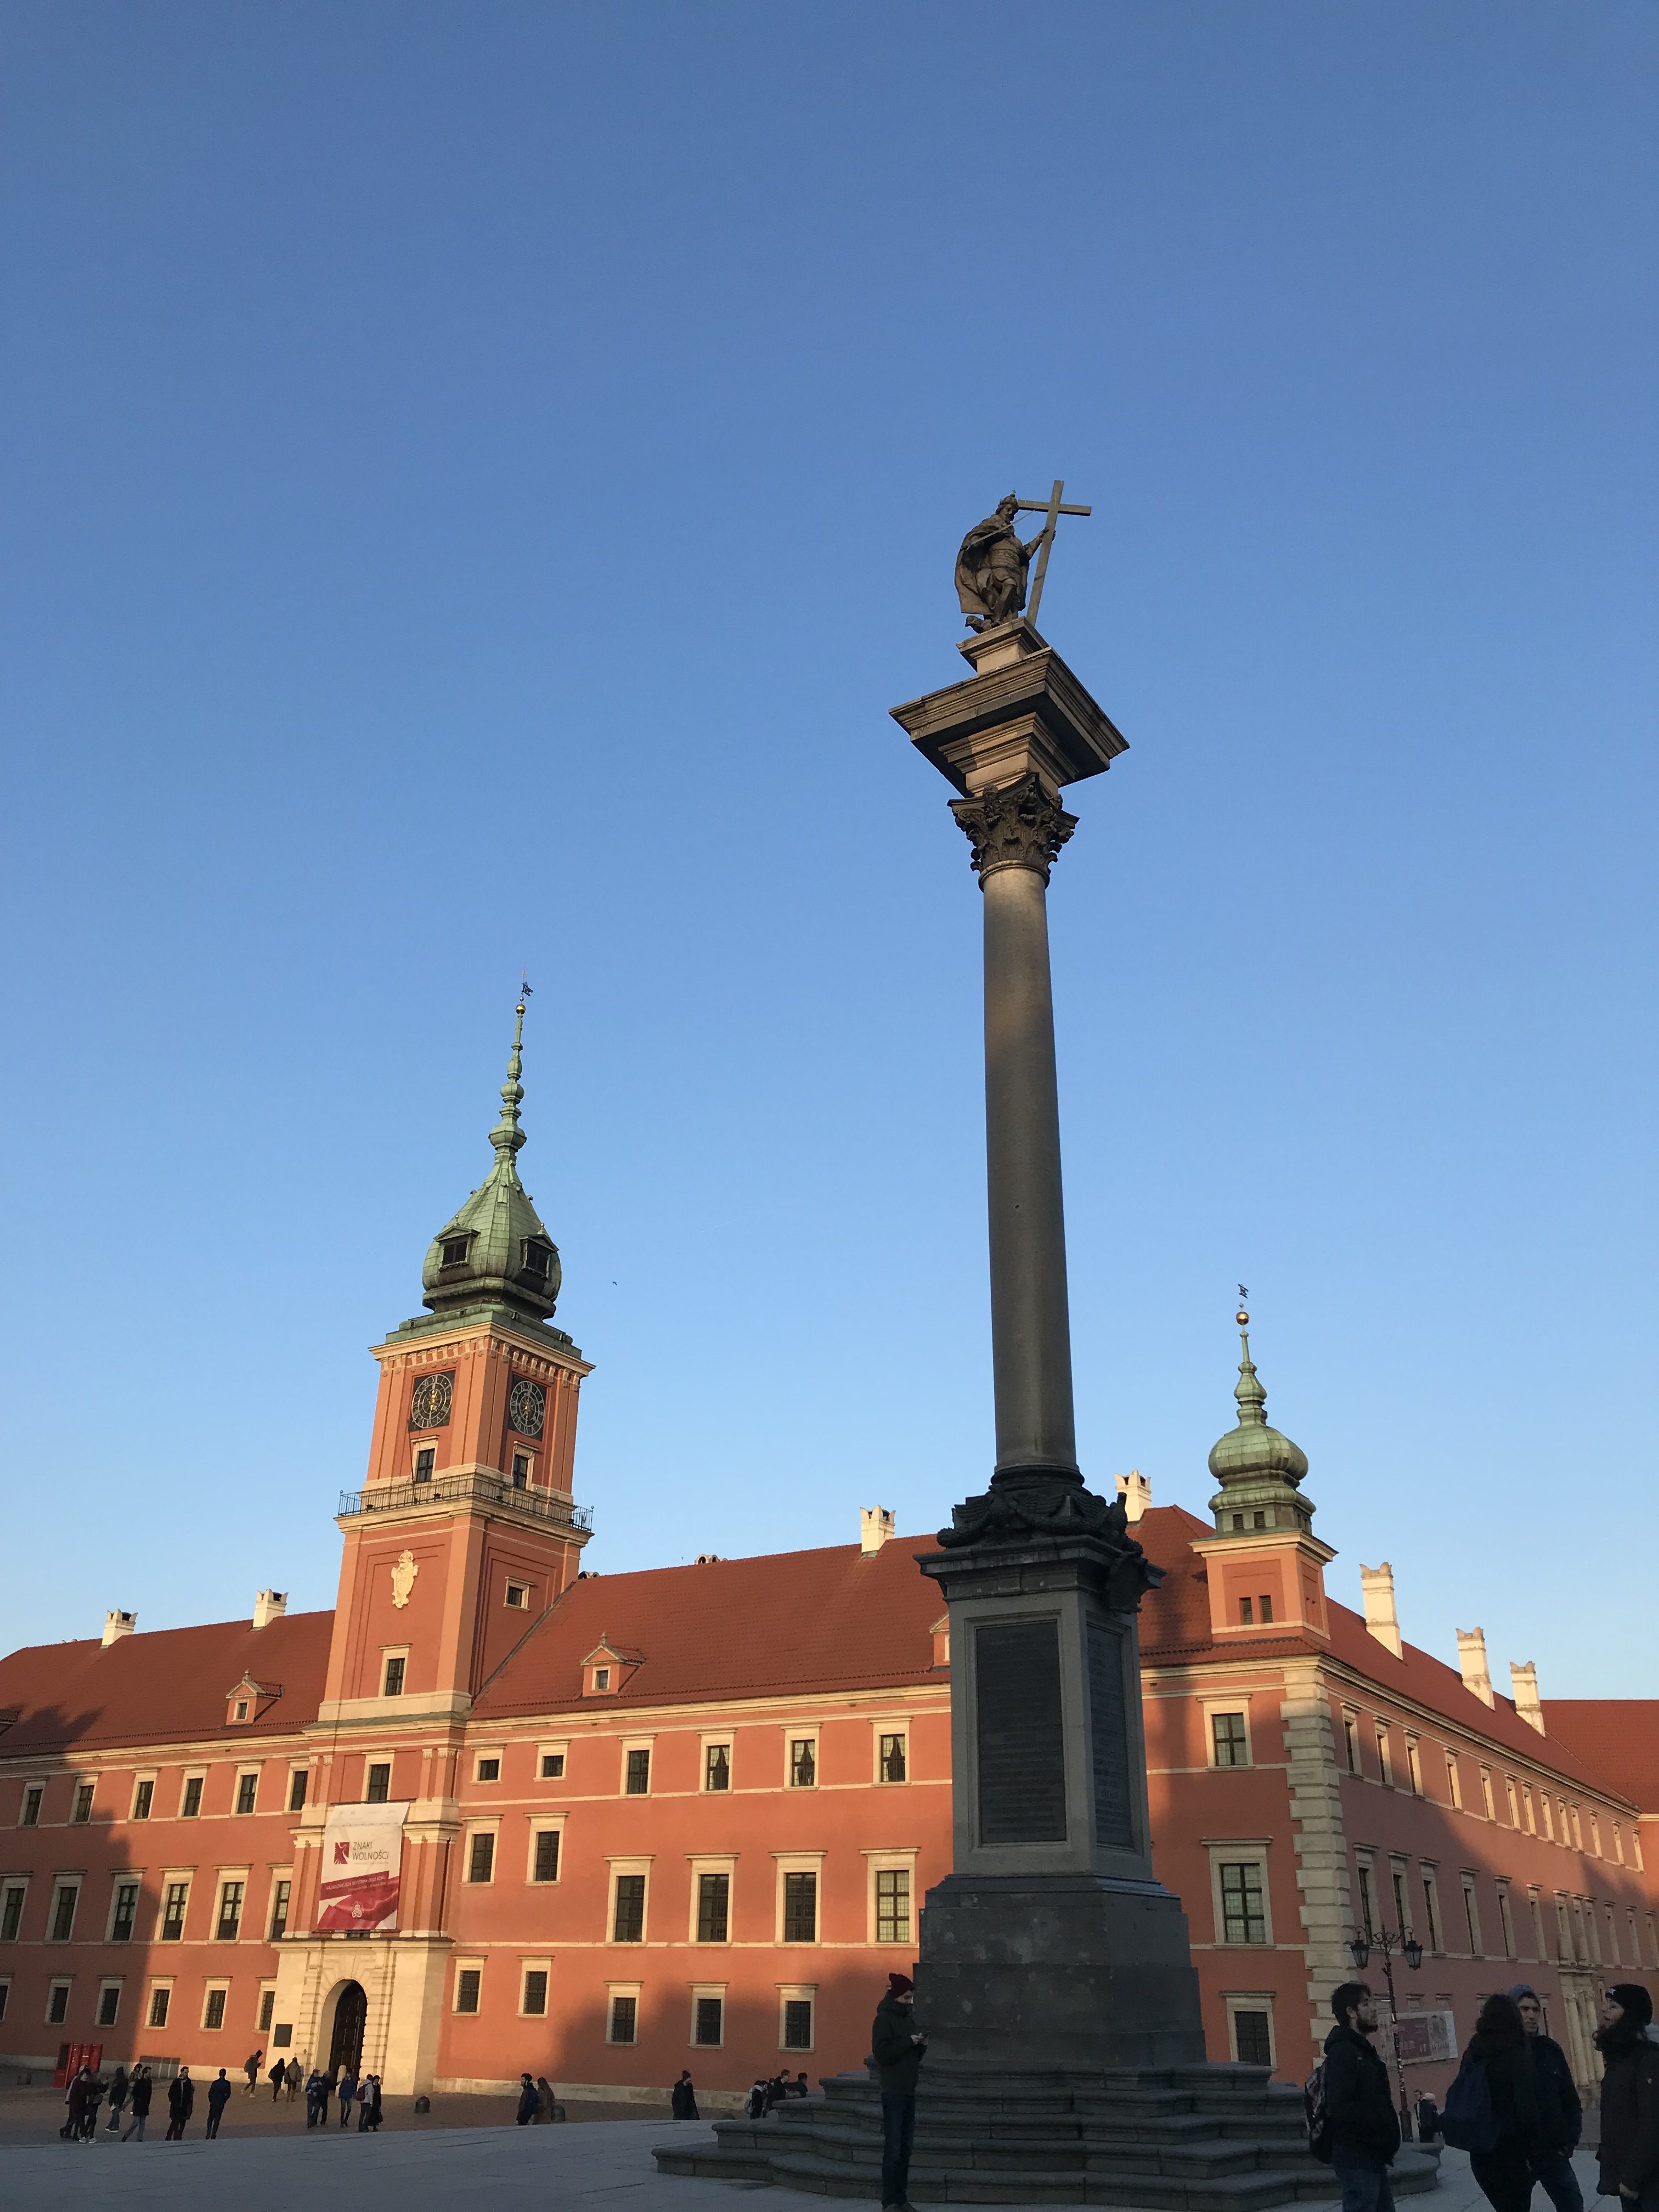 a statue on a pillar in front of Royal Castle, Warsaw